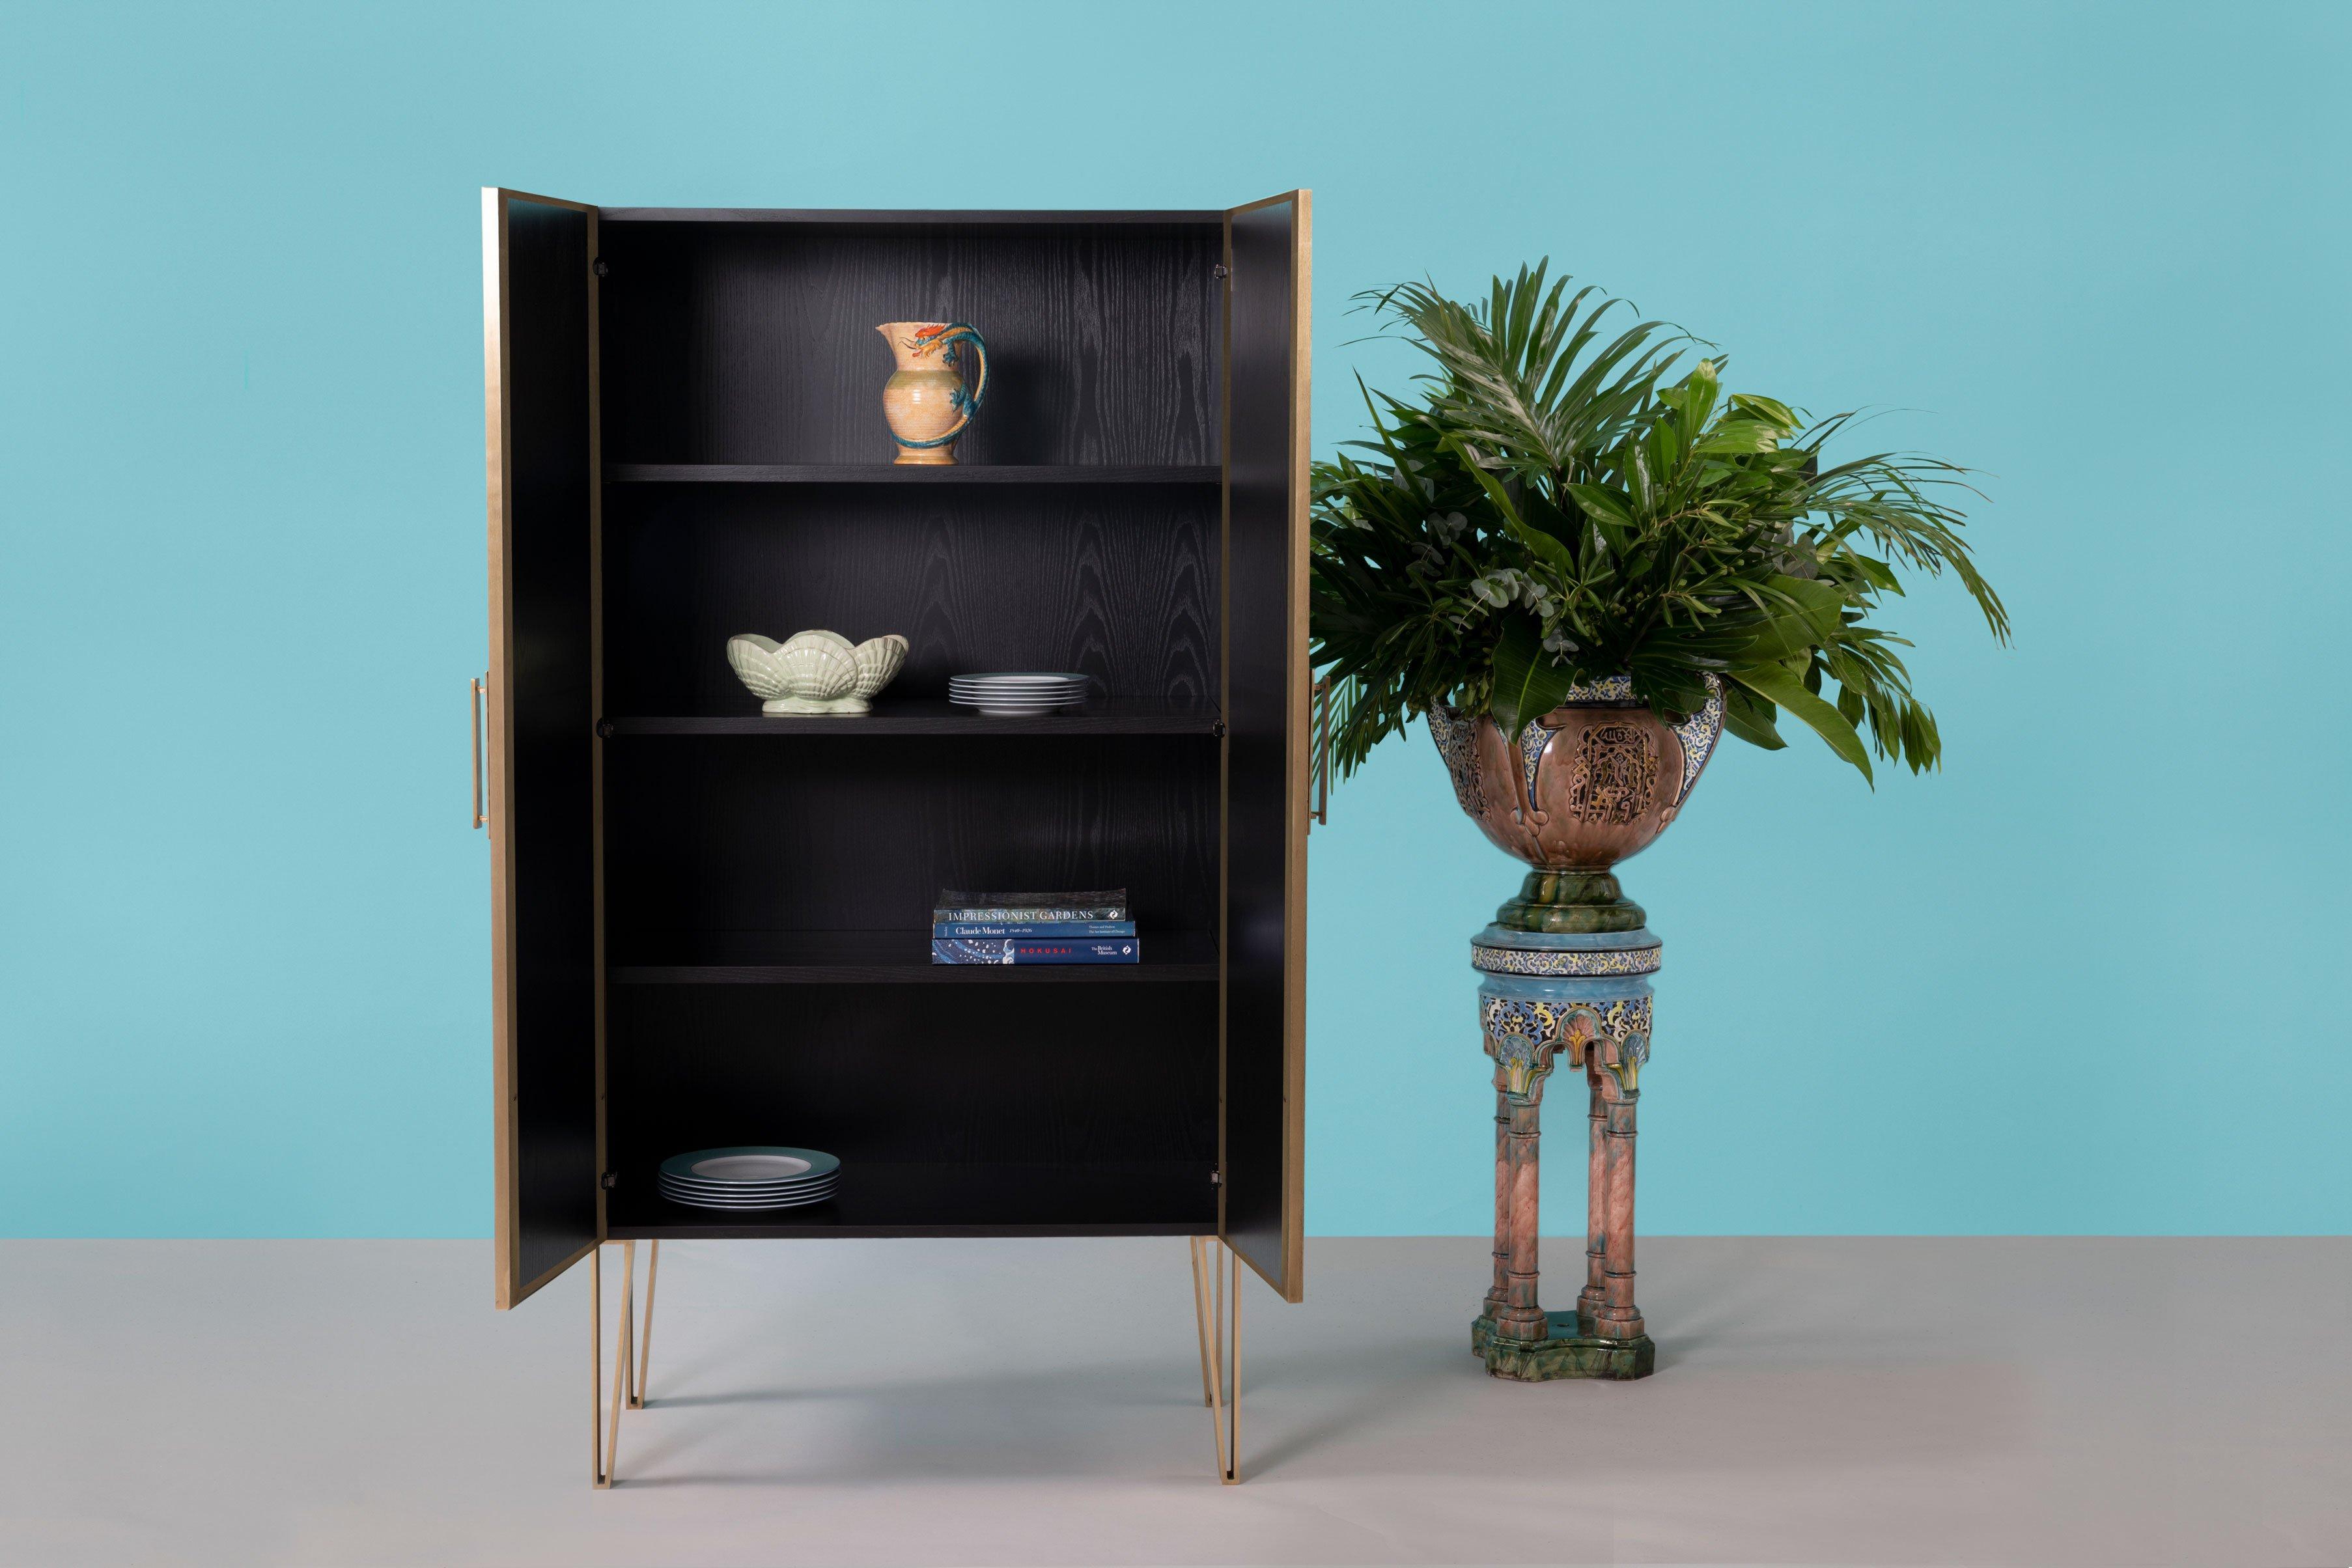 Adorned in FELDER FELDER’s captivating Yellow Leopard print, the Cordelia cabinet is a bold, confident choice for any interior.

Handcrafted in England from lacquered oak wood, this statement piece is fine upholstered in sumptuous silk-blend satin